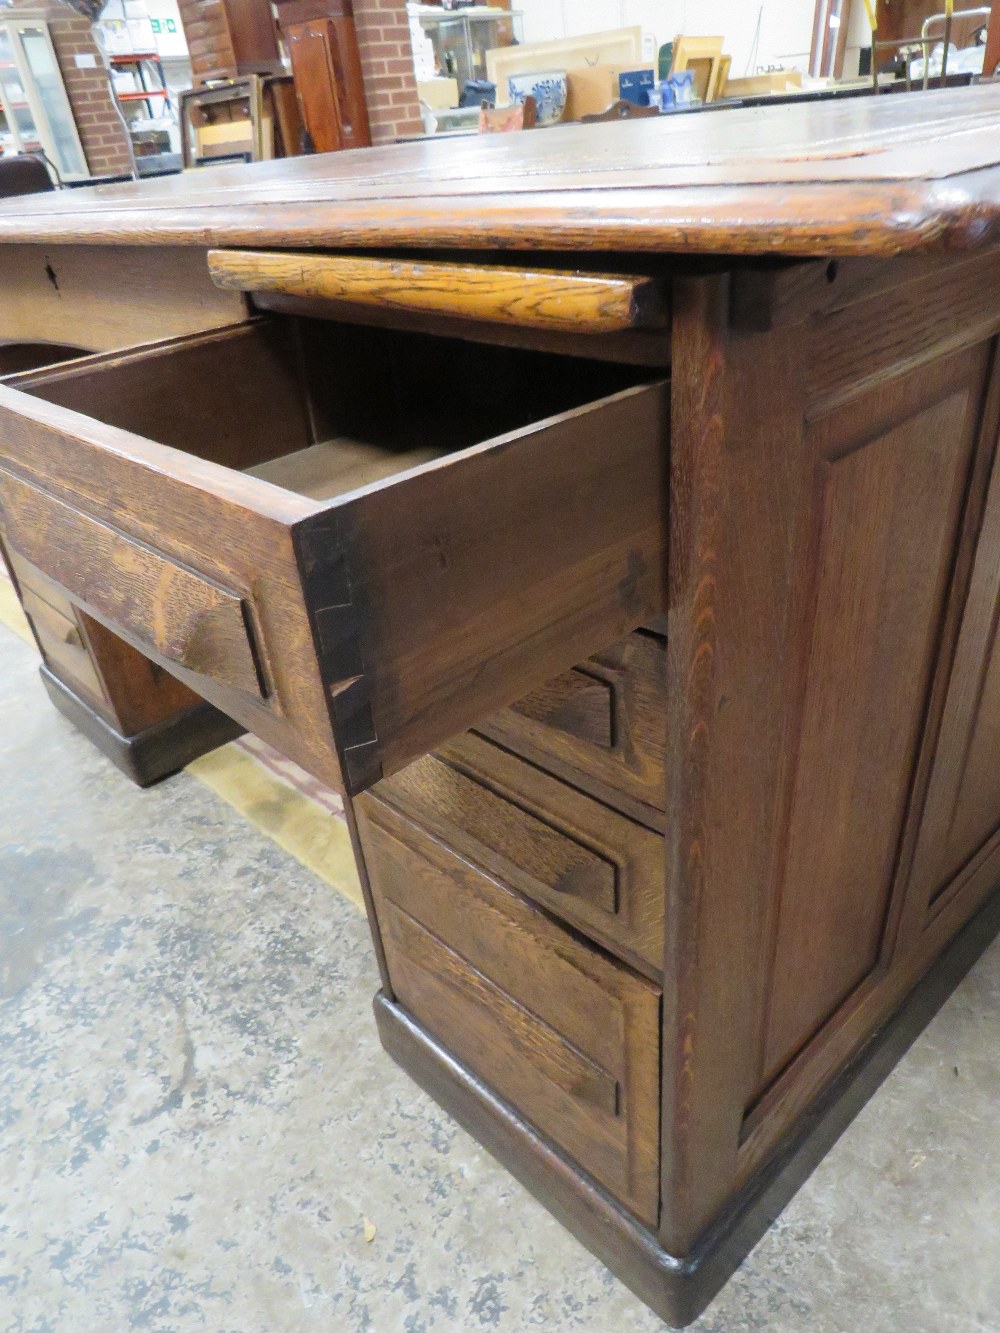 A LARGE LATE 19TH /EARLY 20TH CENTURY OAK PARTNERS DESK WITH INSET BROWN LEATHER TOP H-79 W-152 CM - Image 4 of 4